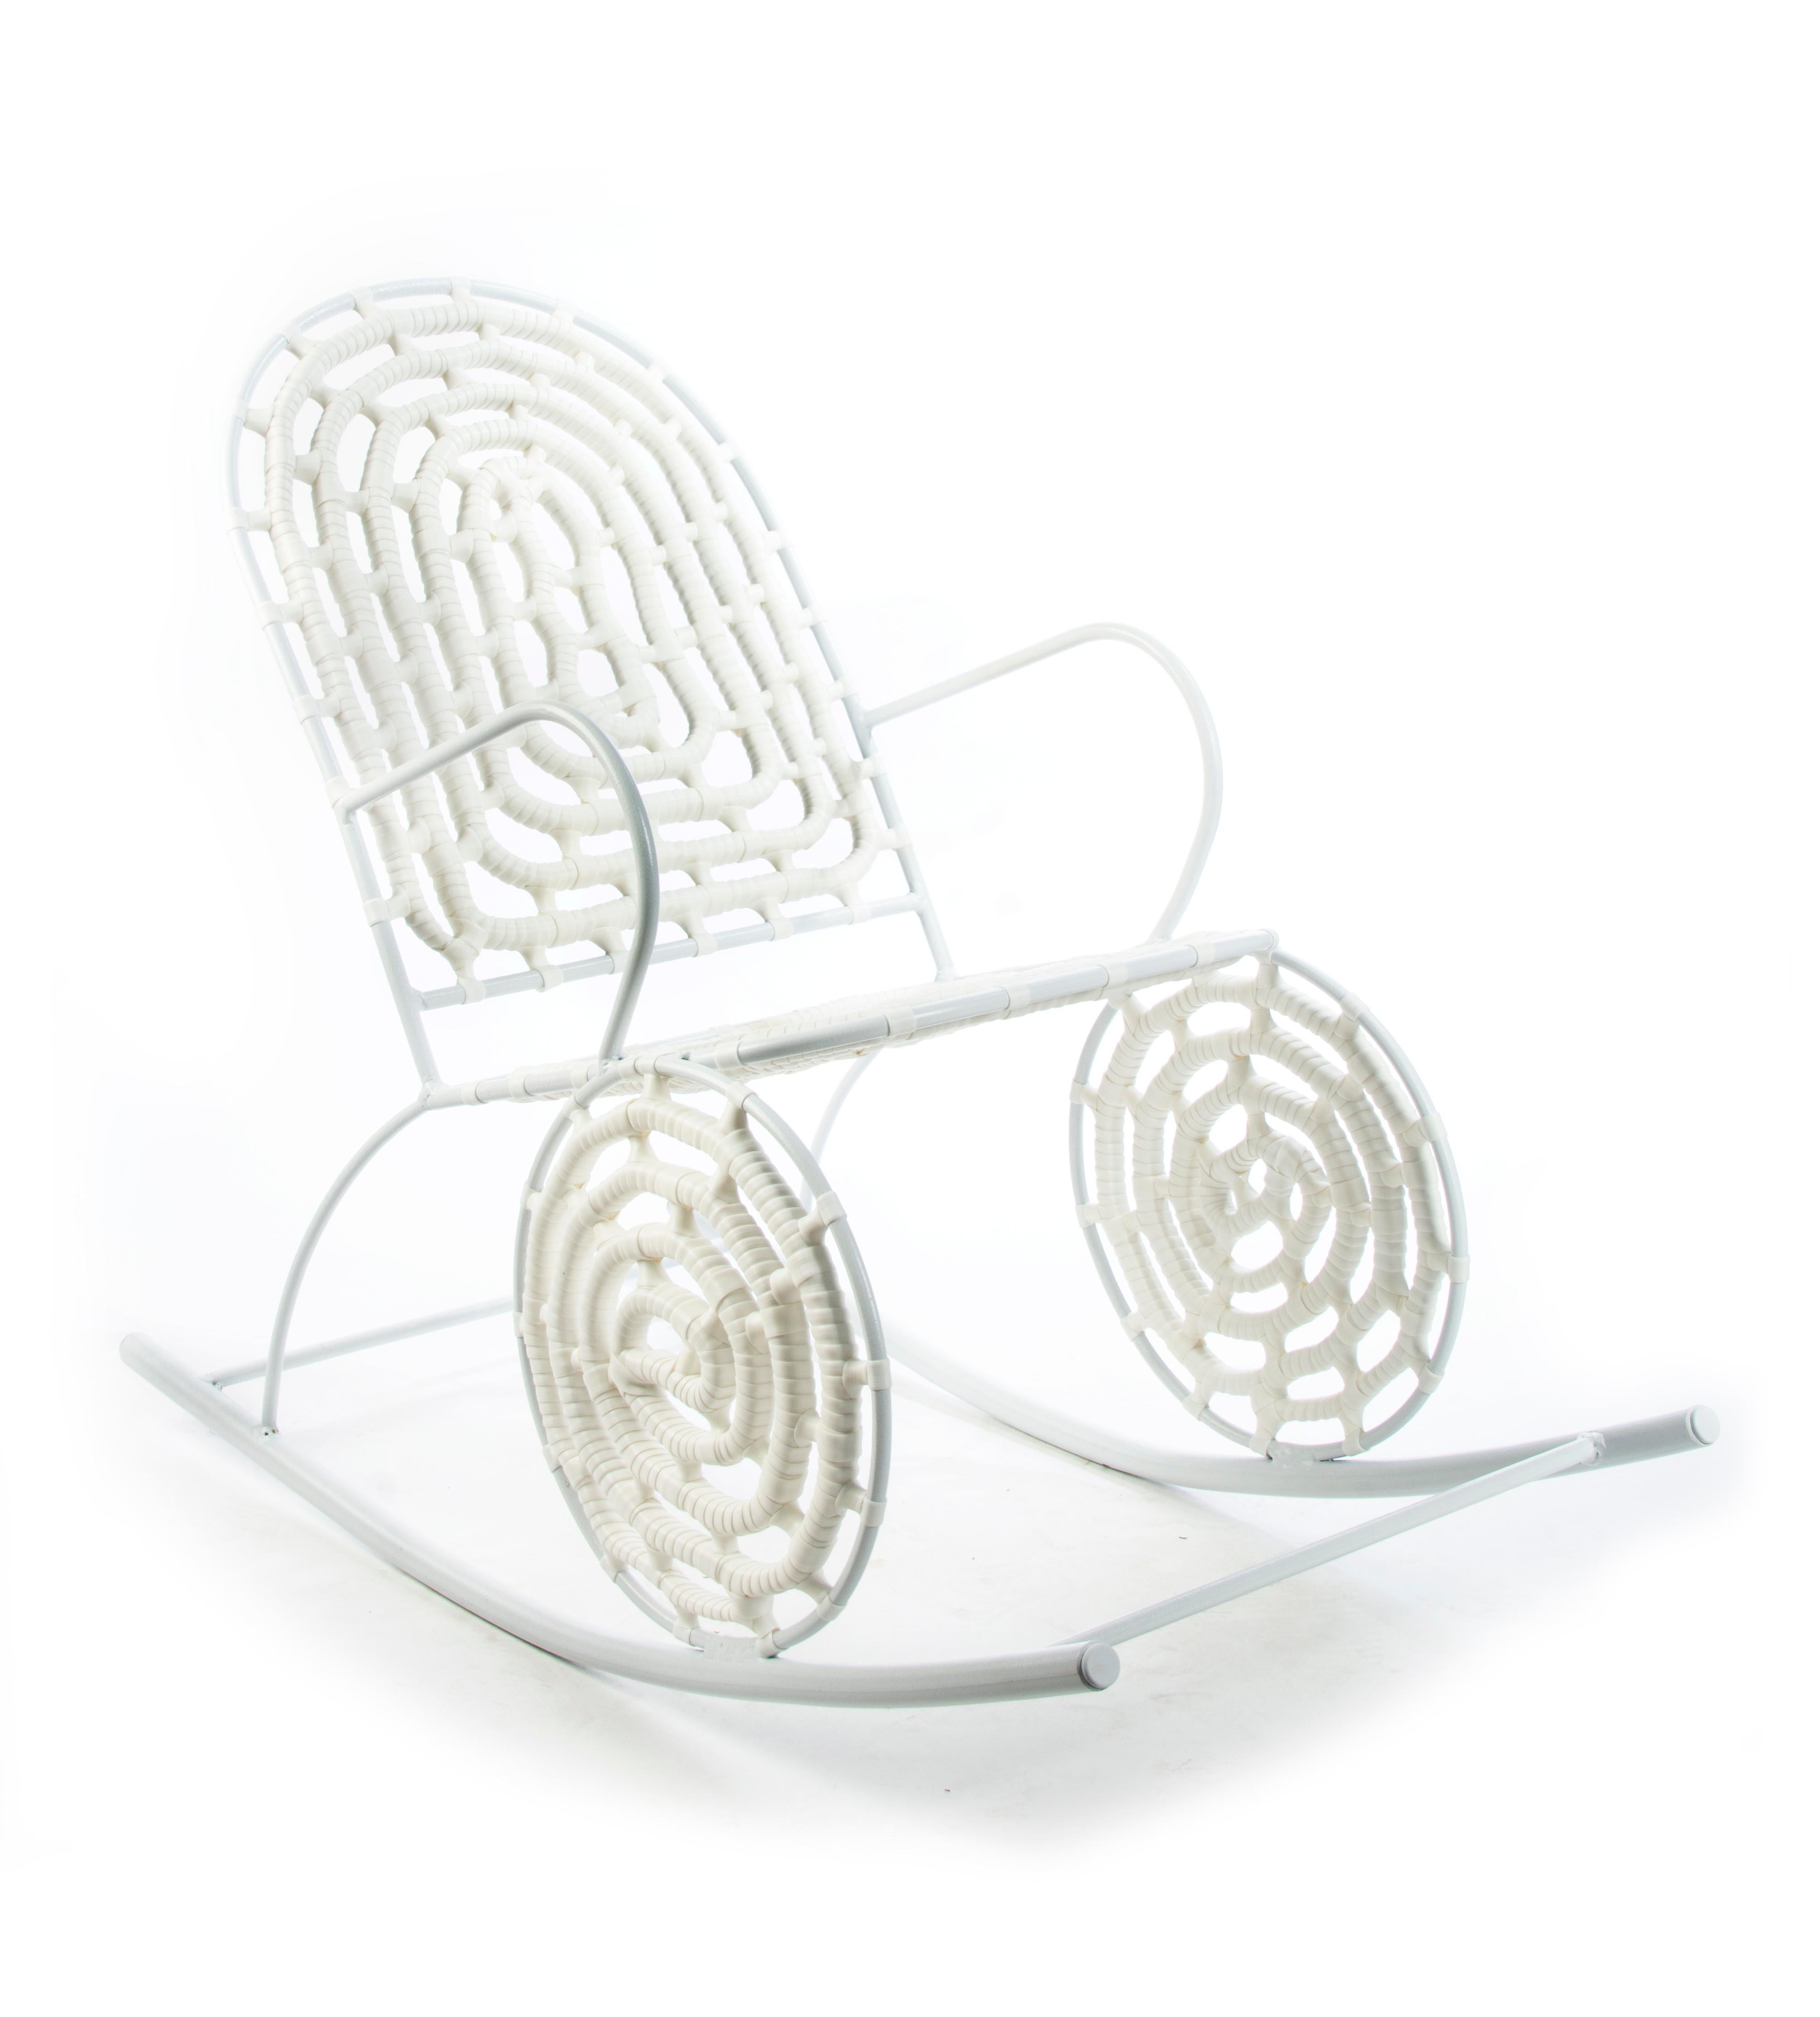 Rock-A-Bye baby chair, 1 of 1 by Nawaaz Saldulker
Edition 1/1,
2021
Materials: Recycled plastic
Dimensions: 75 x 39 x H 60 cm.



